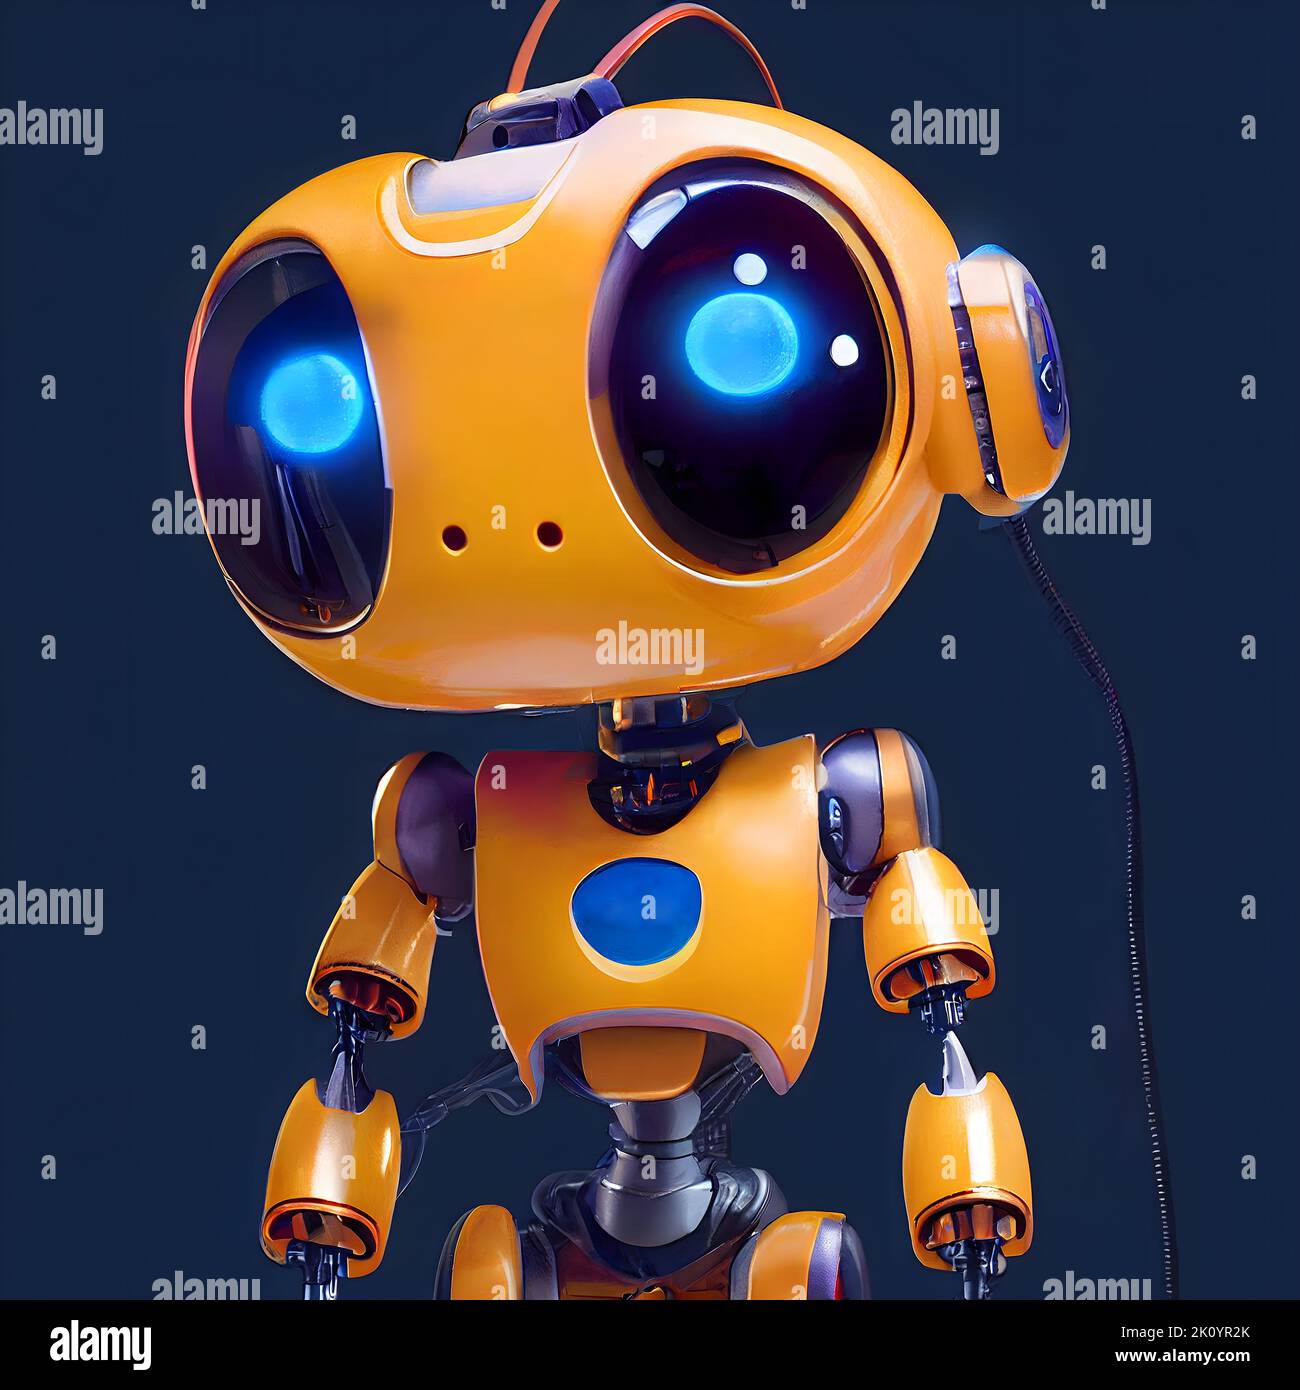 Illustrative caricature of a curious and cool puppy robot. 3D render. Stock Photo